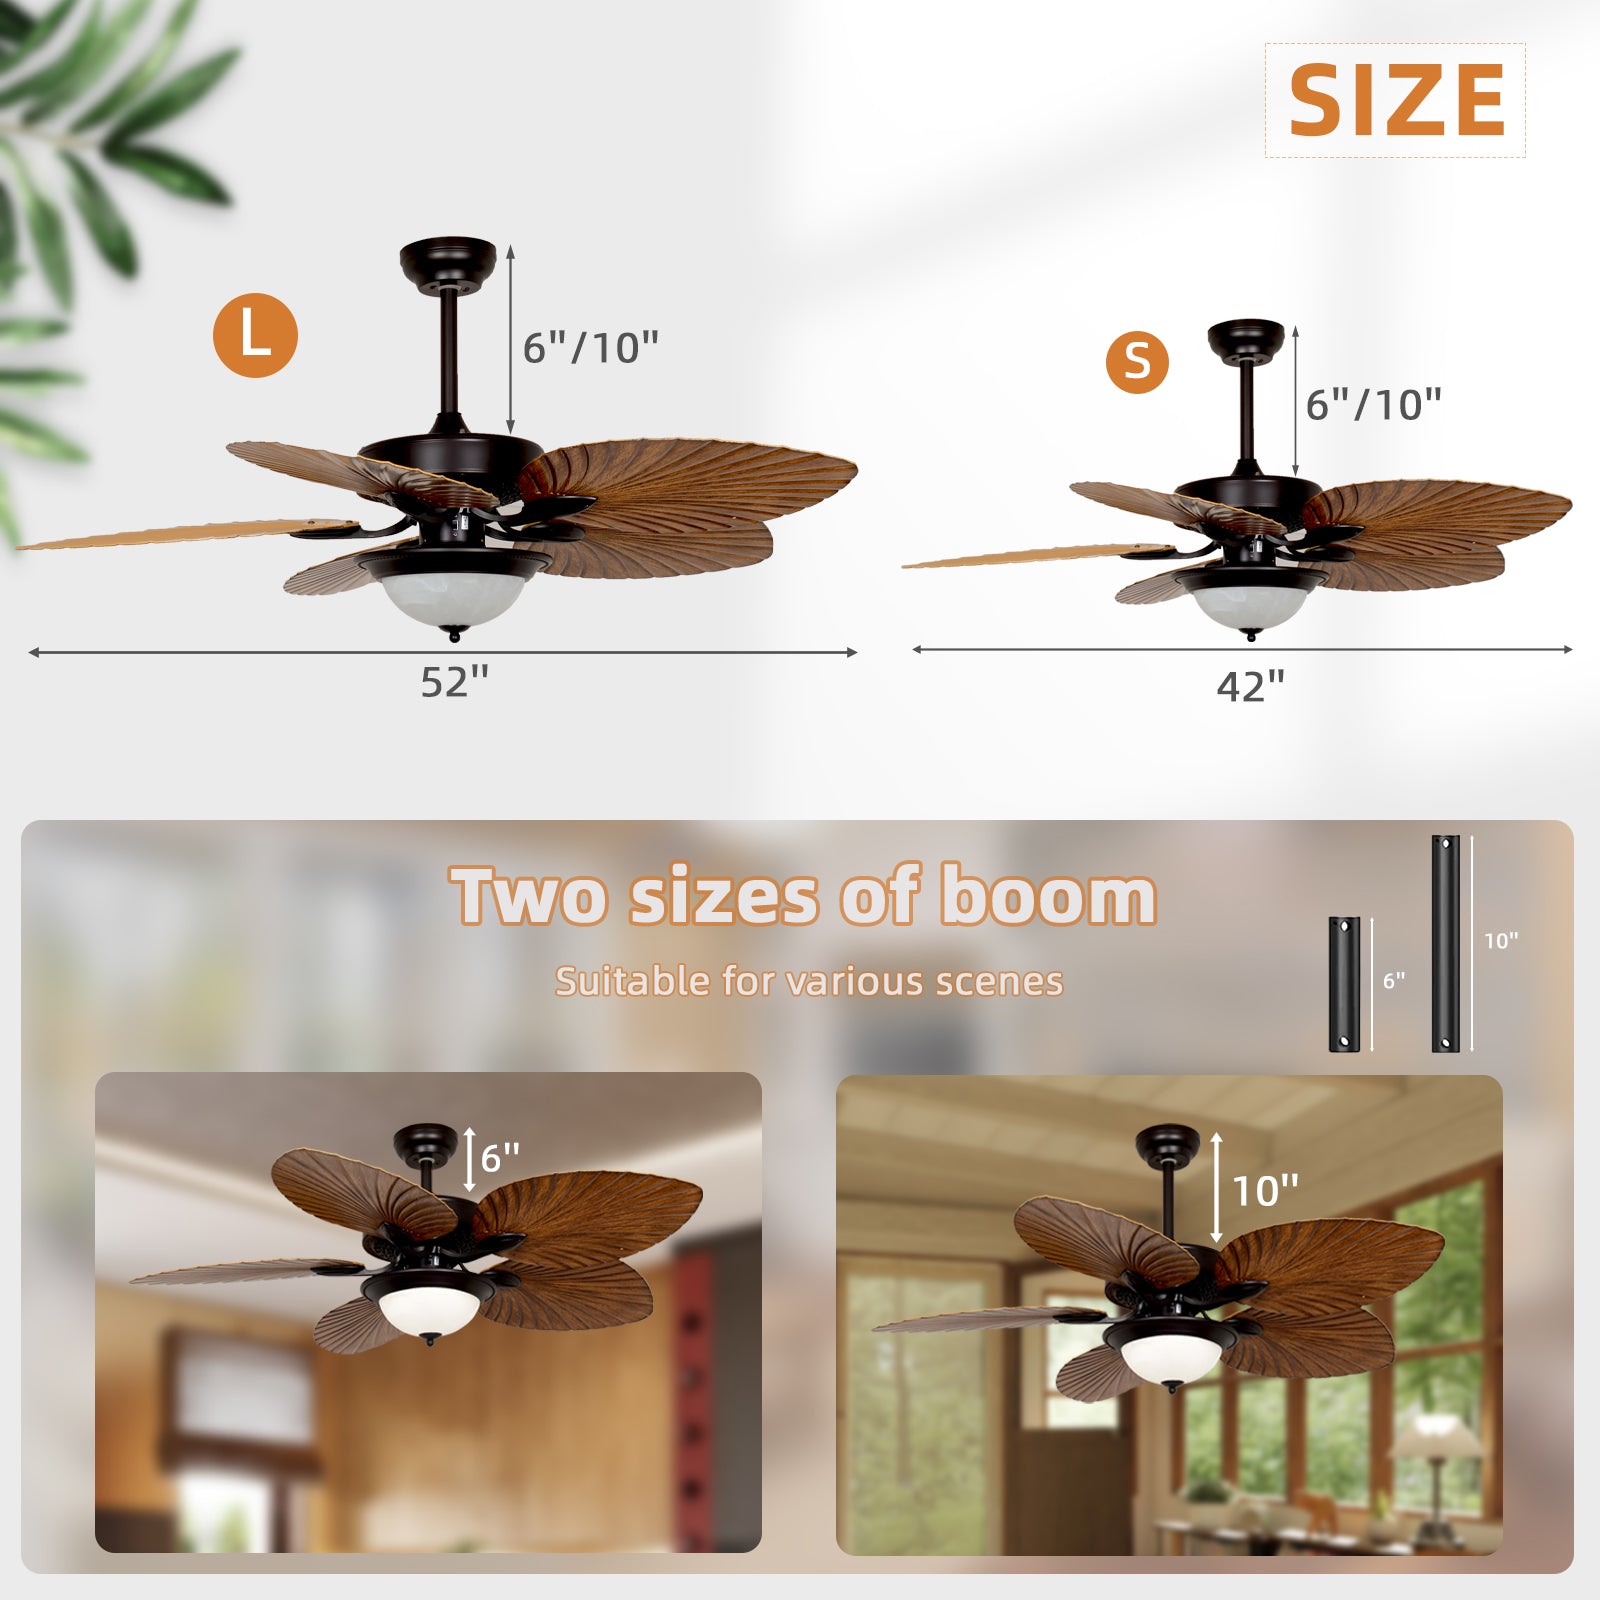 Ceiling Fan with LED Light DC motor 52 inch Large Air Volume Remote Control for Kitchen Bedroom Dining room